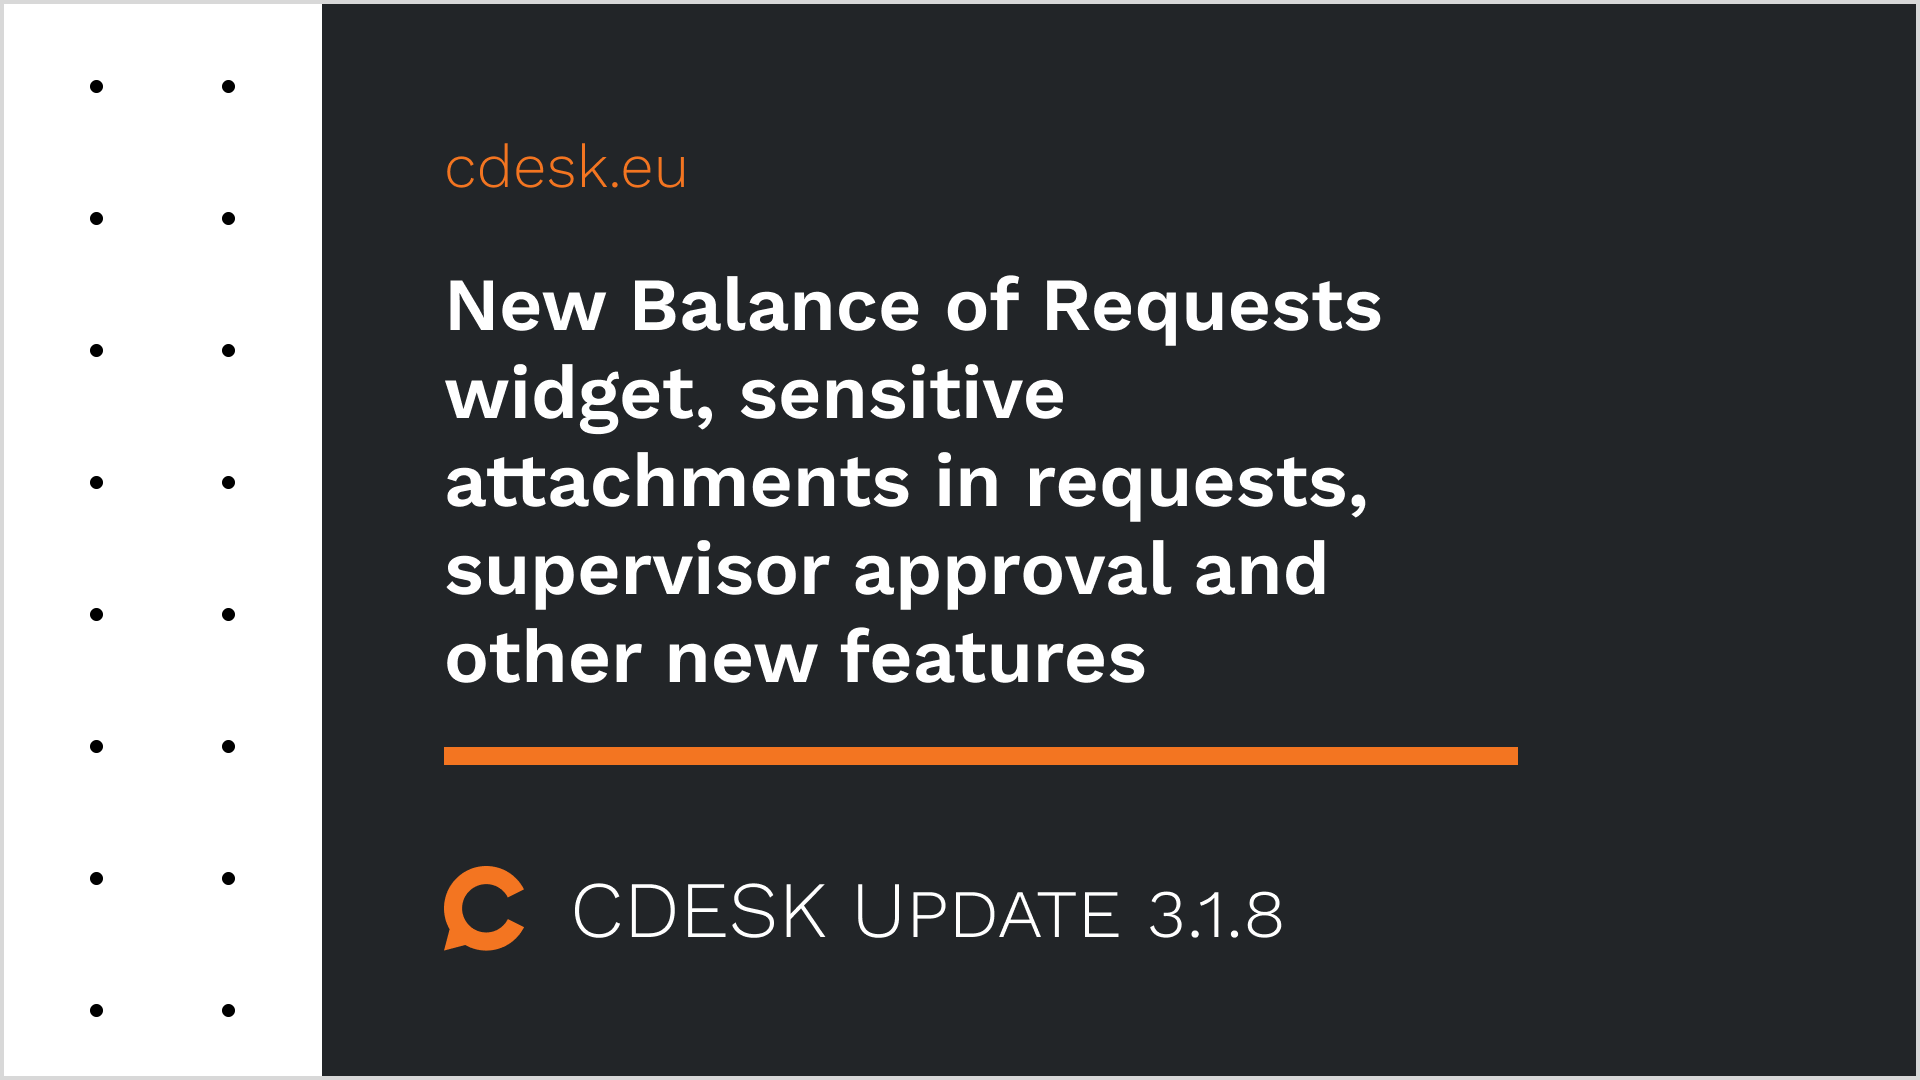 New Balance of Requests widget, sensitive attachments in requests, supervisor approval and other new features